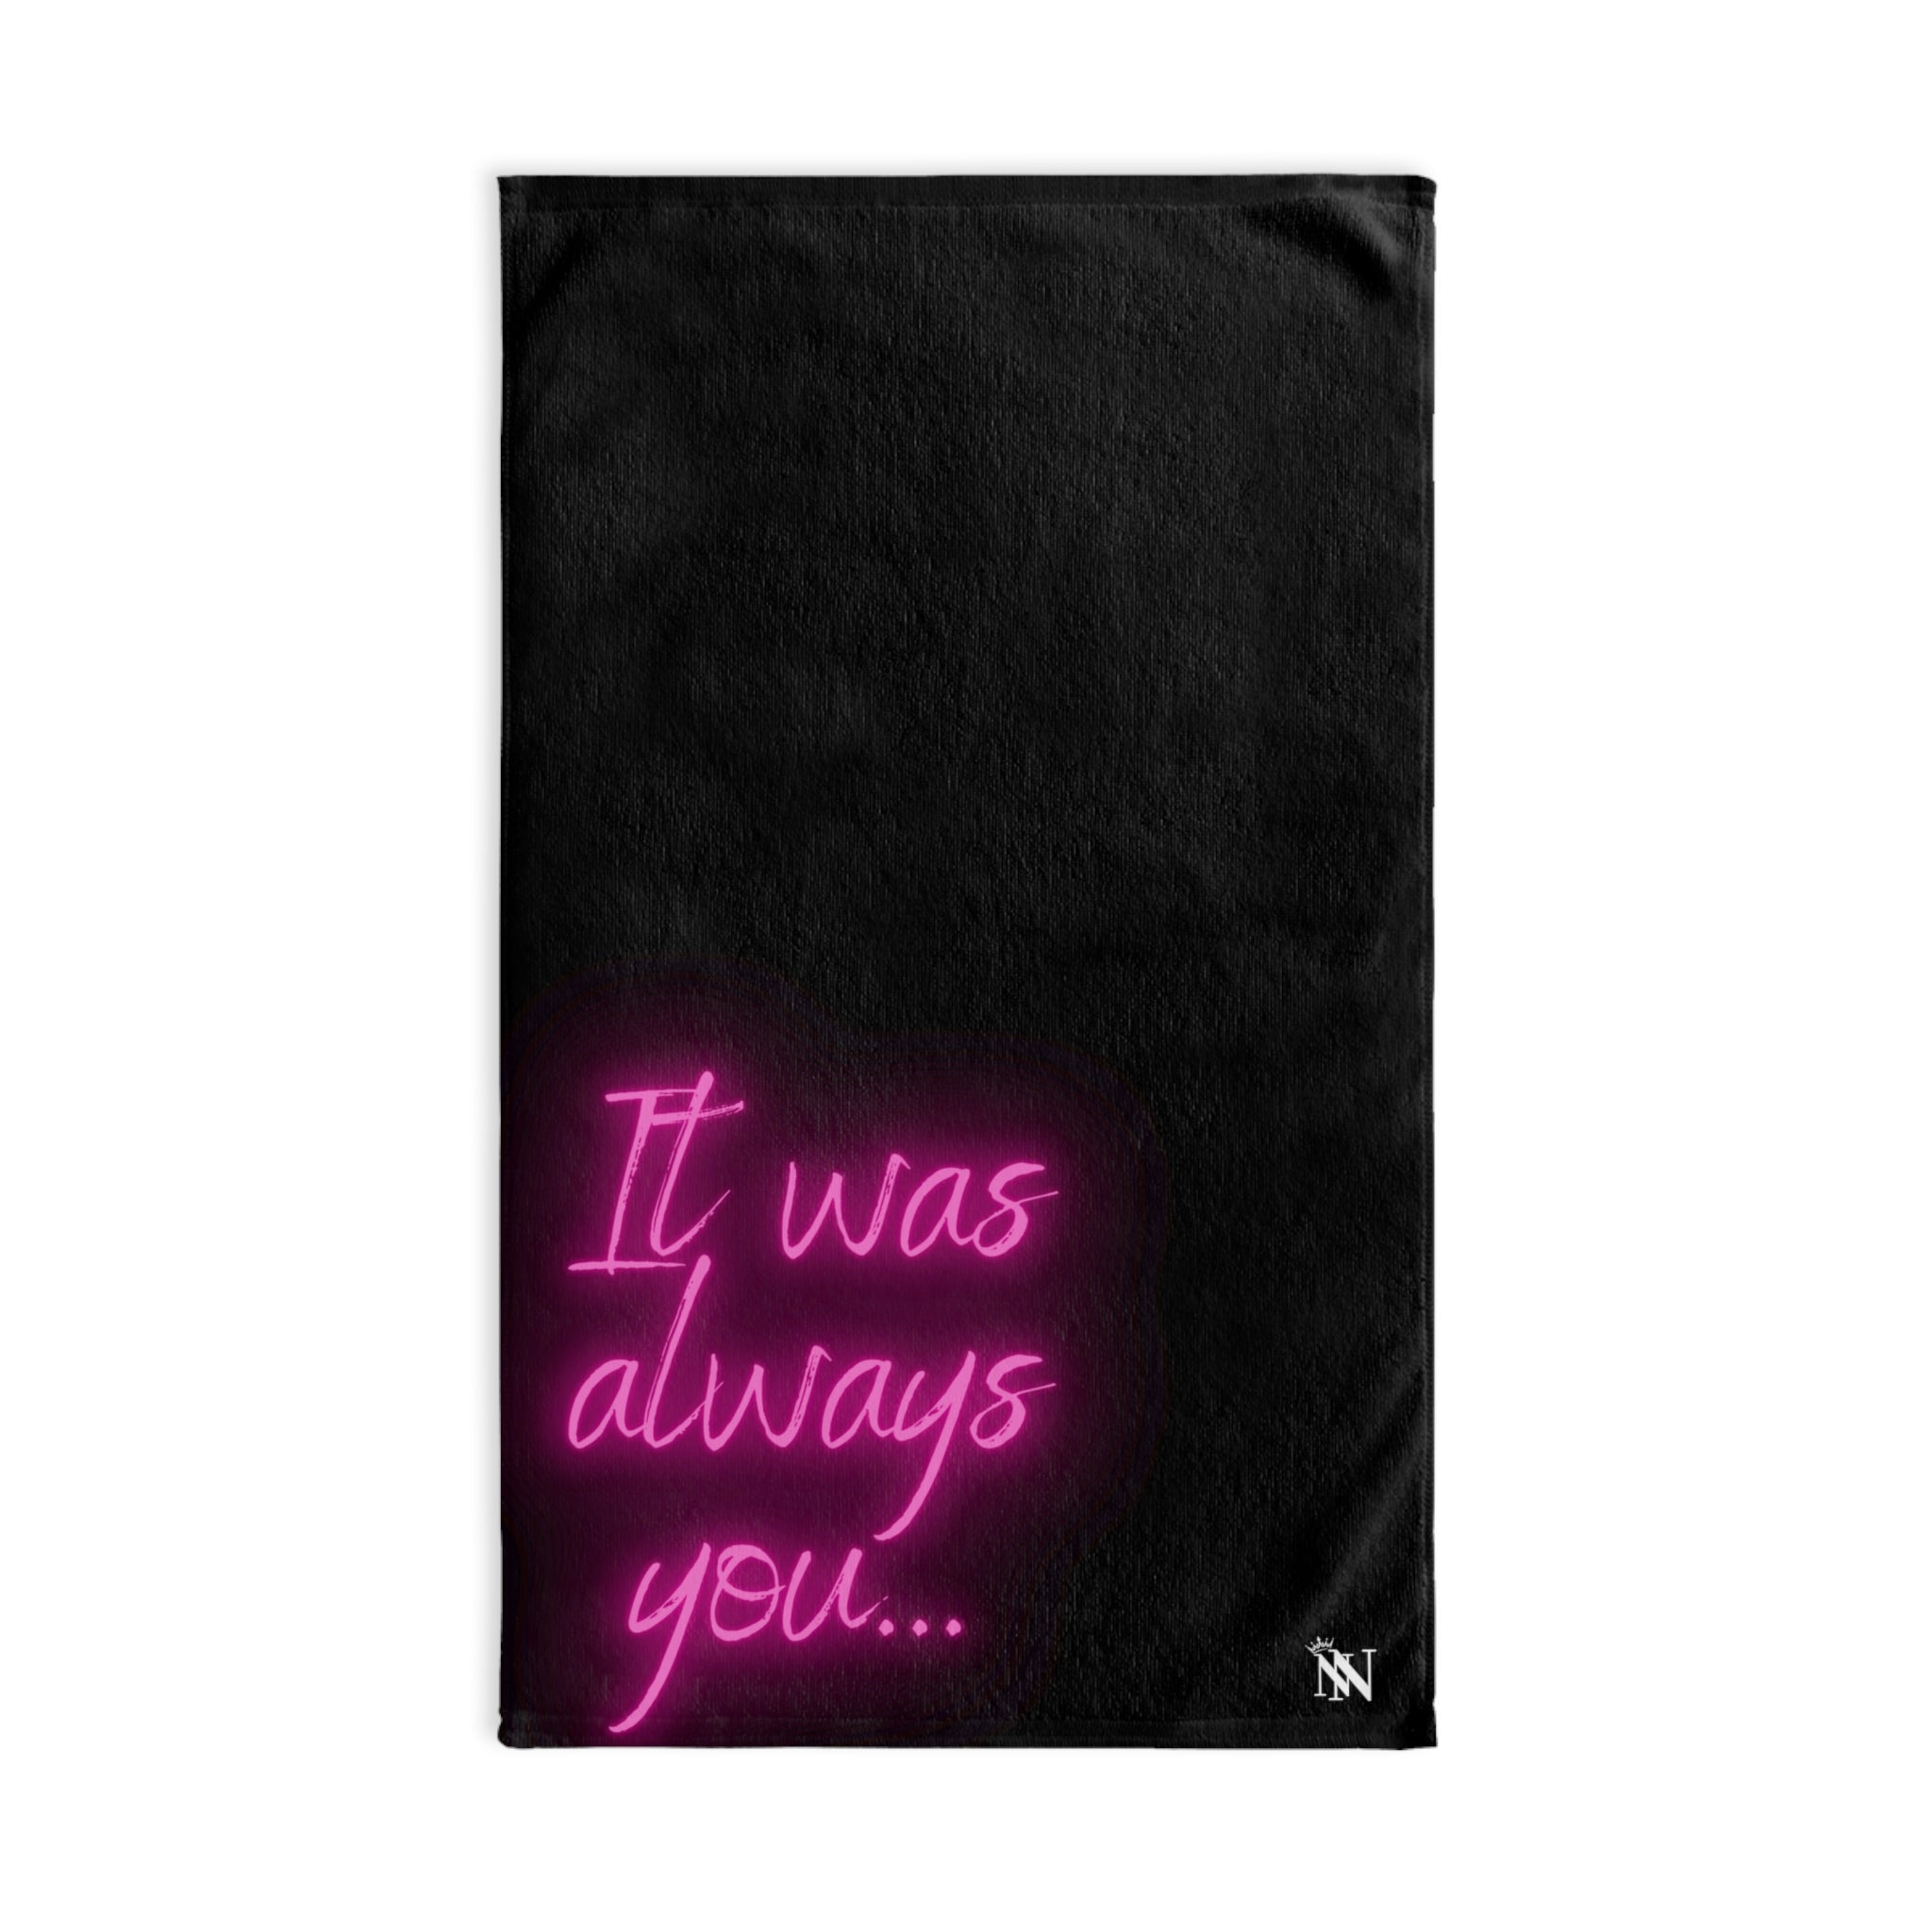 Was Always You Black | Sexy Gifts for Boyfriend, Funny Towel Romantic Gift for Wedding Couple Fiance First Year 2nd Anniversary Valentines, Party Gag Gifts, Joke Humor Cloth for Husband Men BF NECTAR NAPKINS